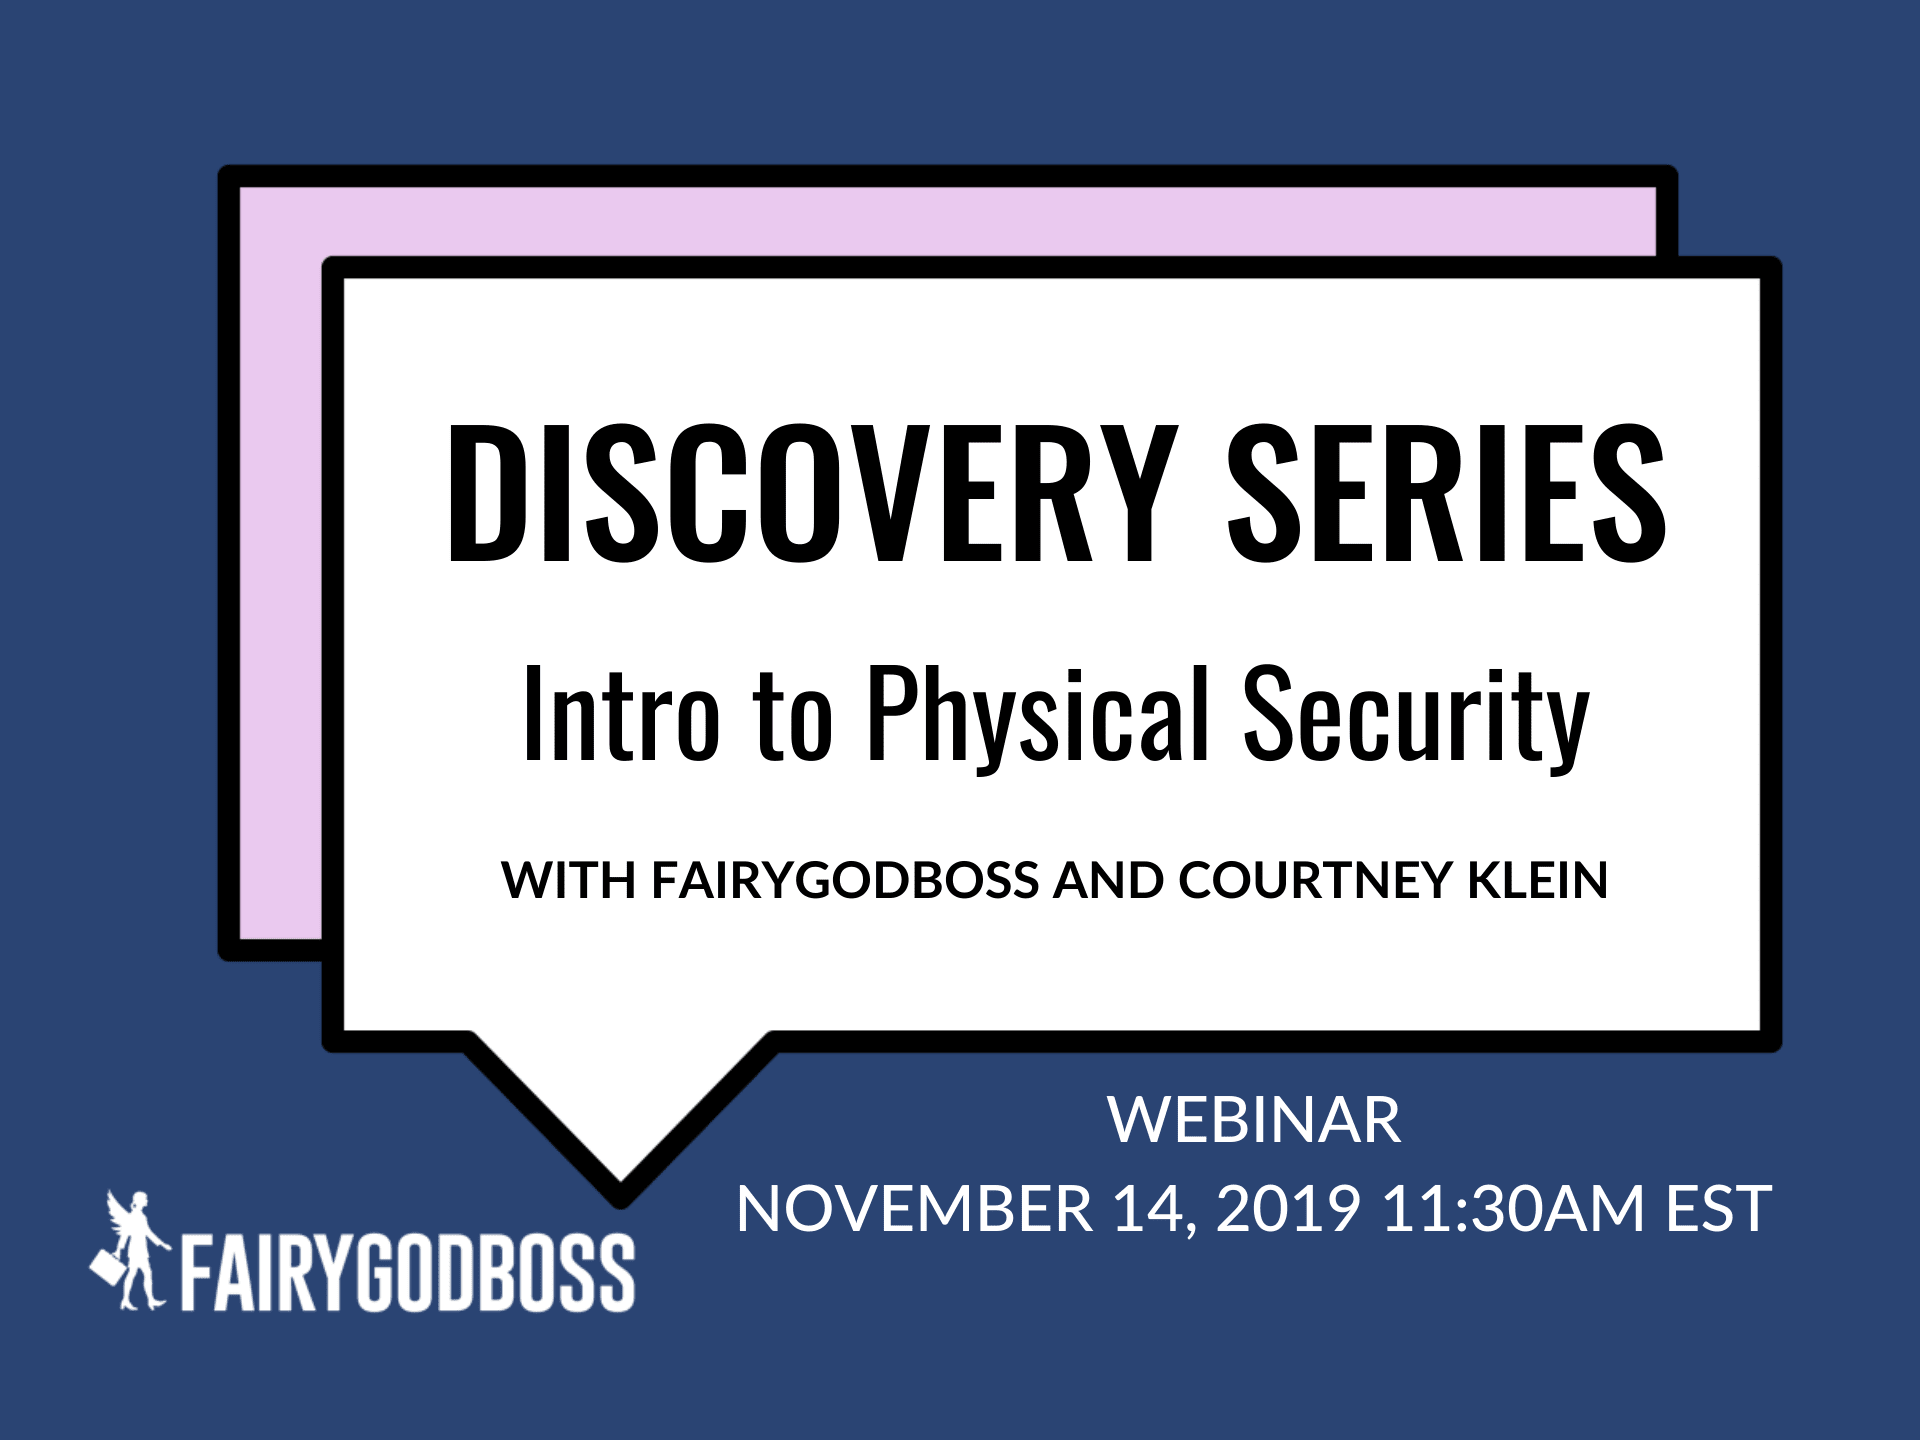 Discovery Series: Intro to Physical Security